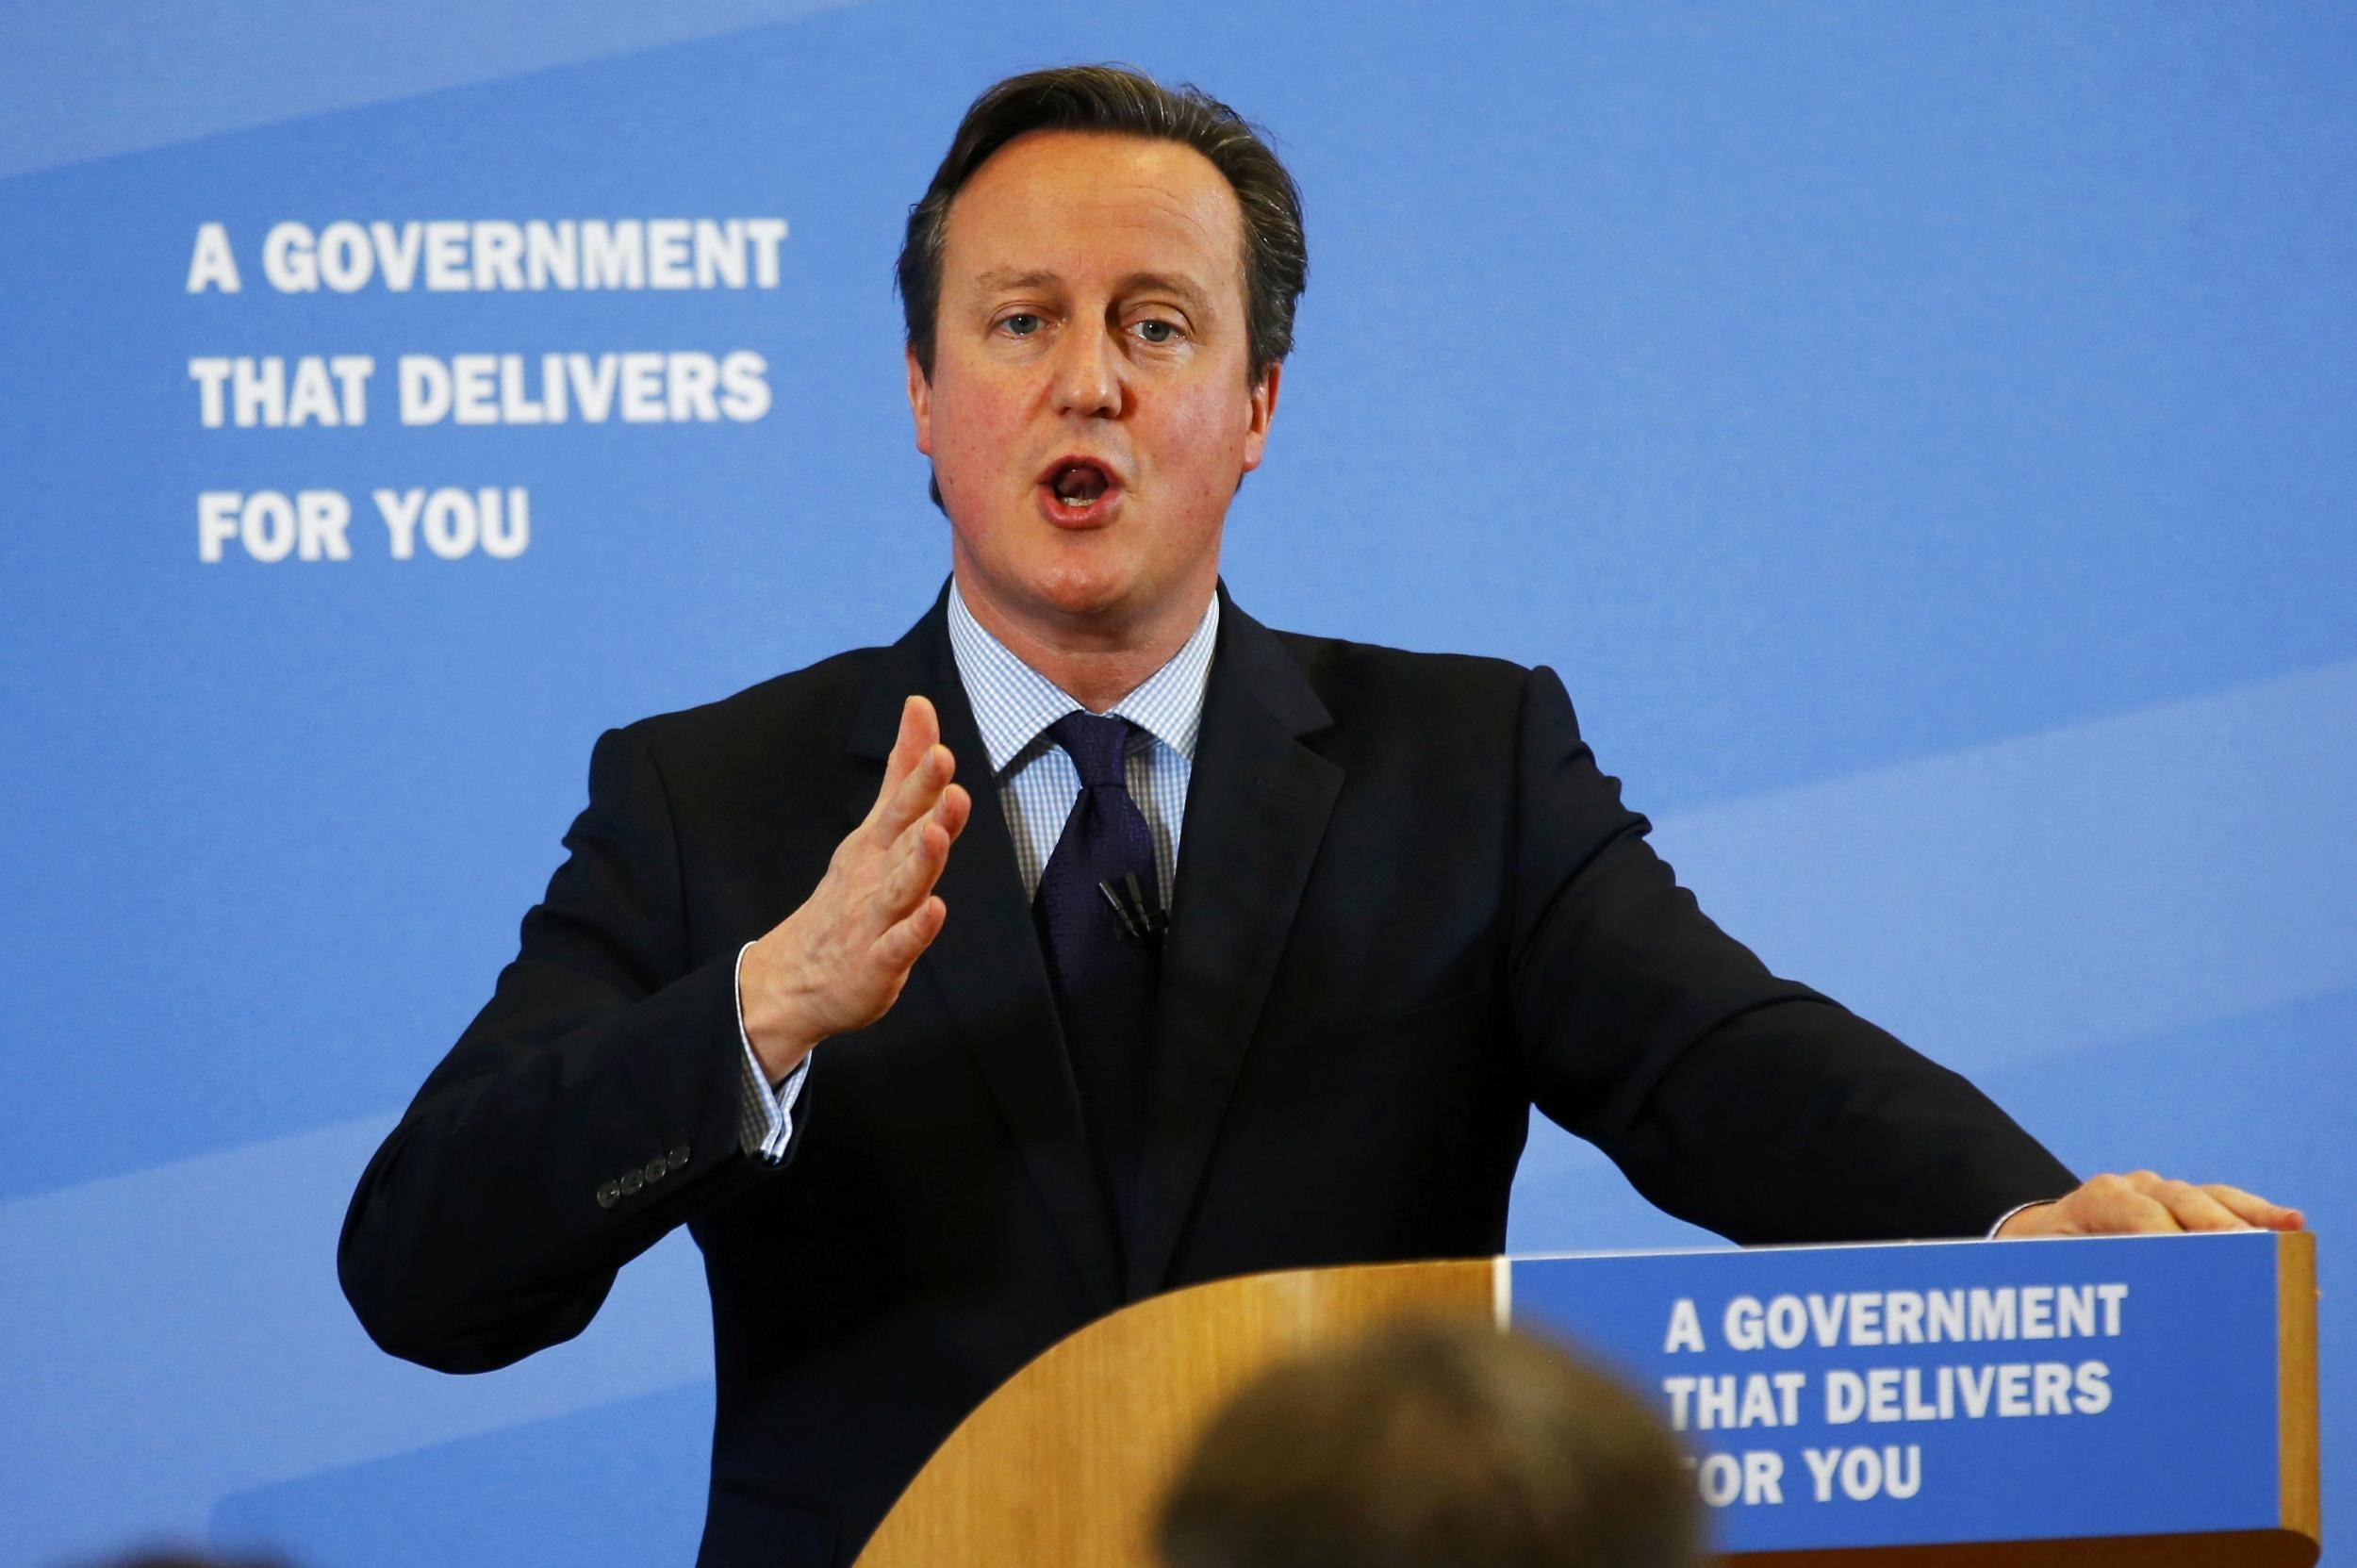 The Prime Minister is trying to renegotiate the terms of the UK's EU membership